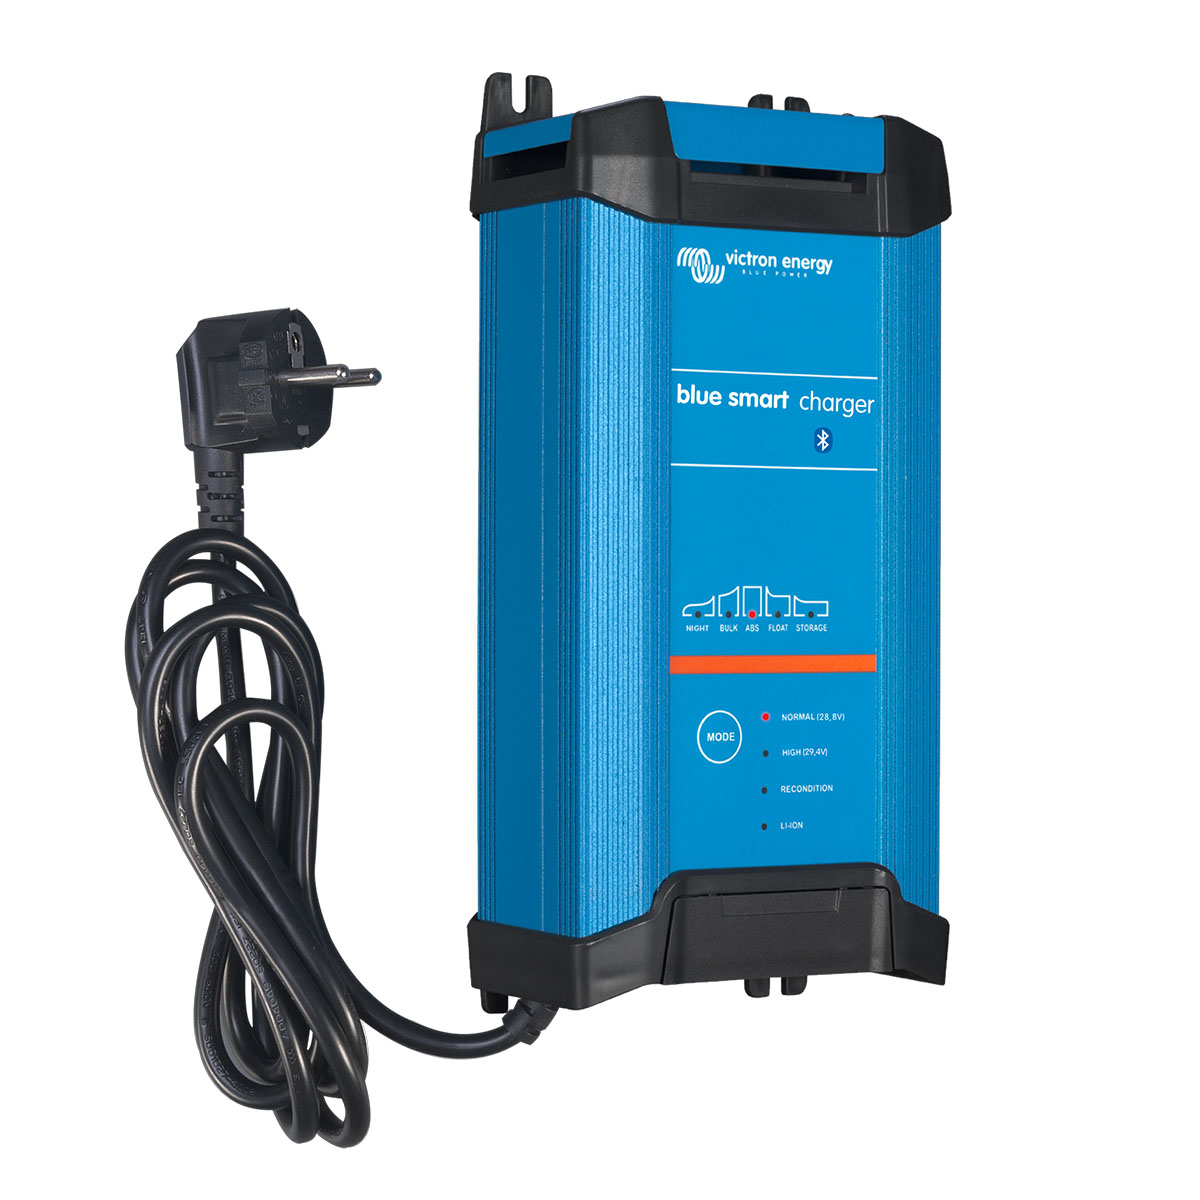 Victron Blue Smart IP22 Charger 24/16(3) 230V CEE 7/7 (USt-befreit nach §12 Abs.3 Nr. 1 S.1 UStG)